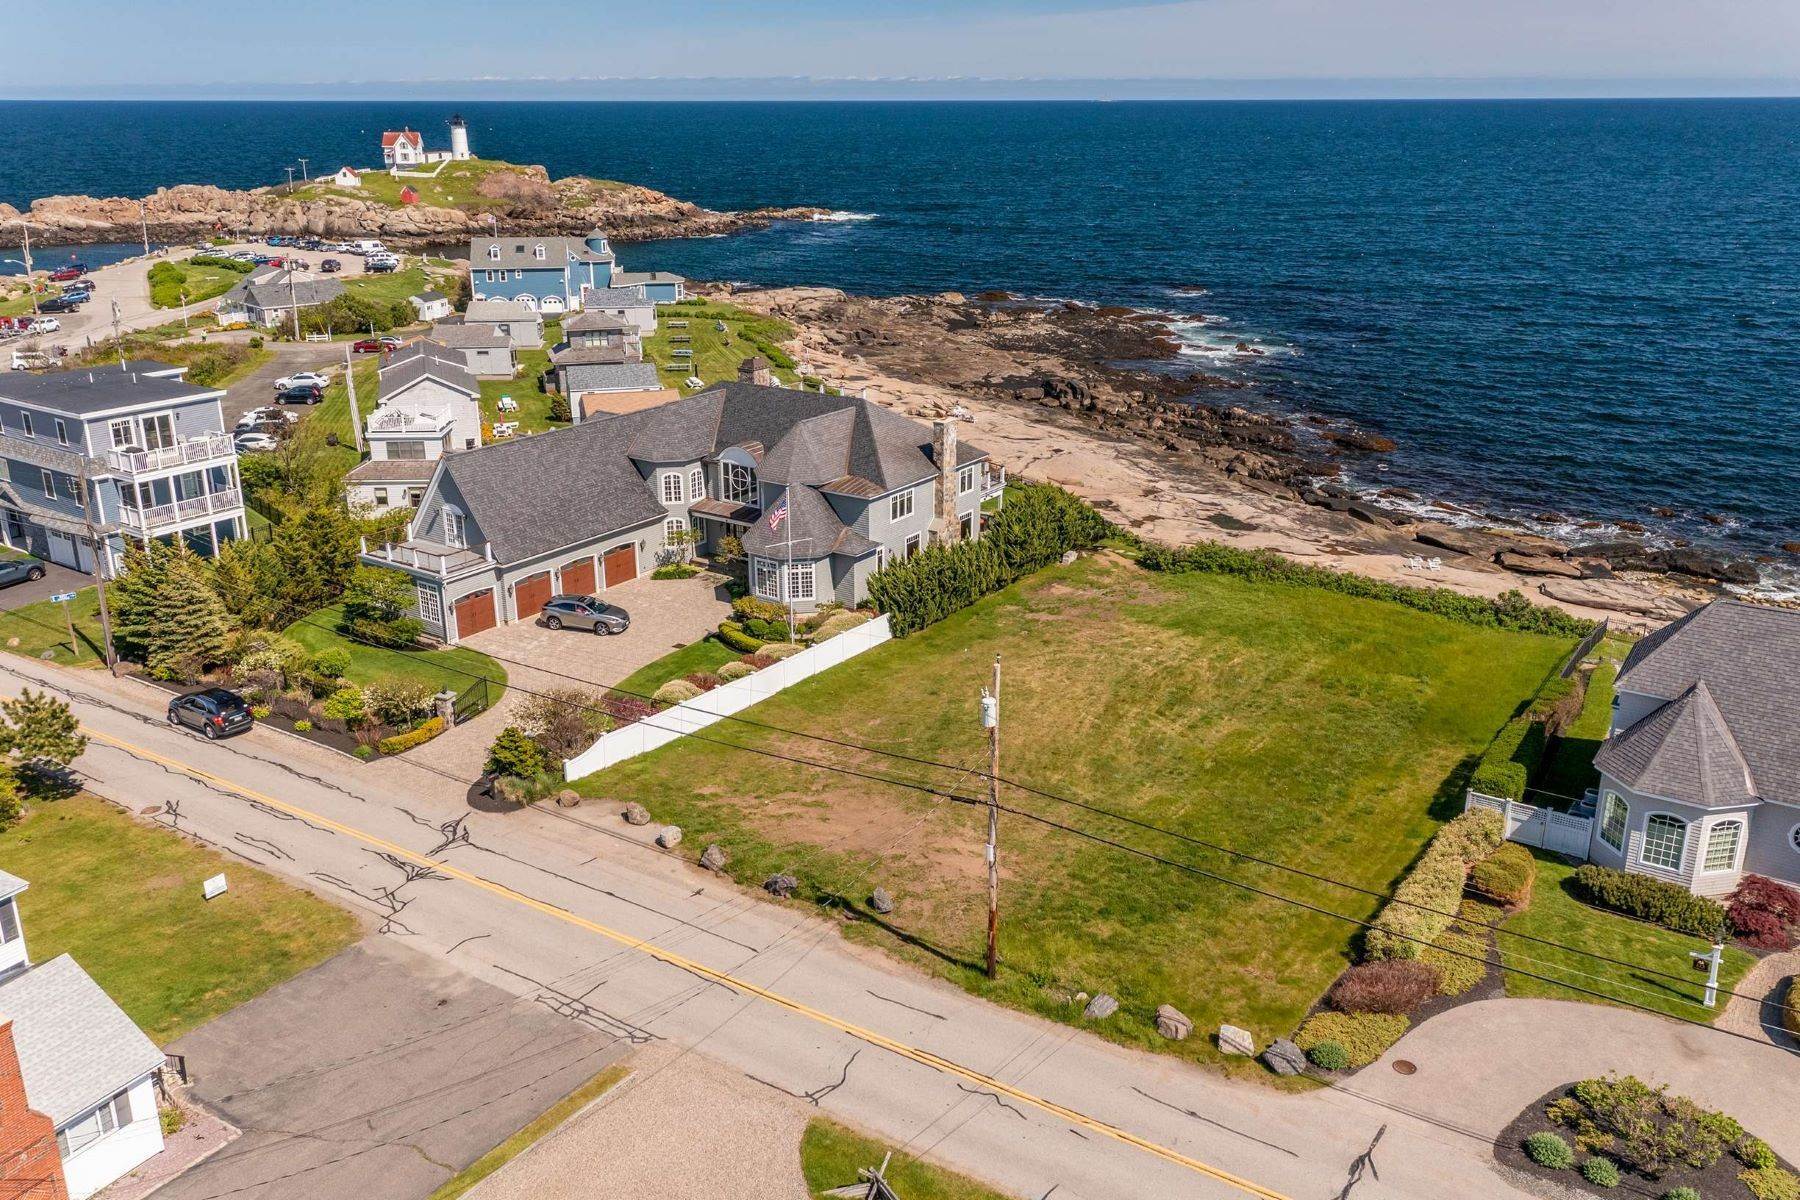 Land for Sale at Unobstructed Ocean Views - Level Building Lot on Nubble Peninsula 175 Nubble Road, York, ME 03909